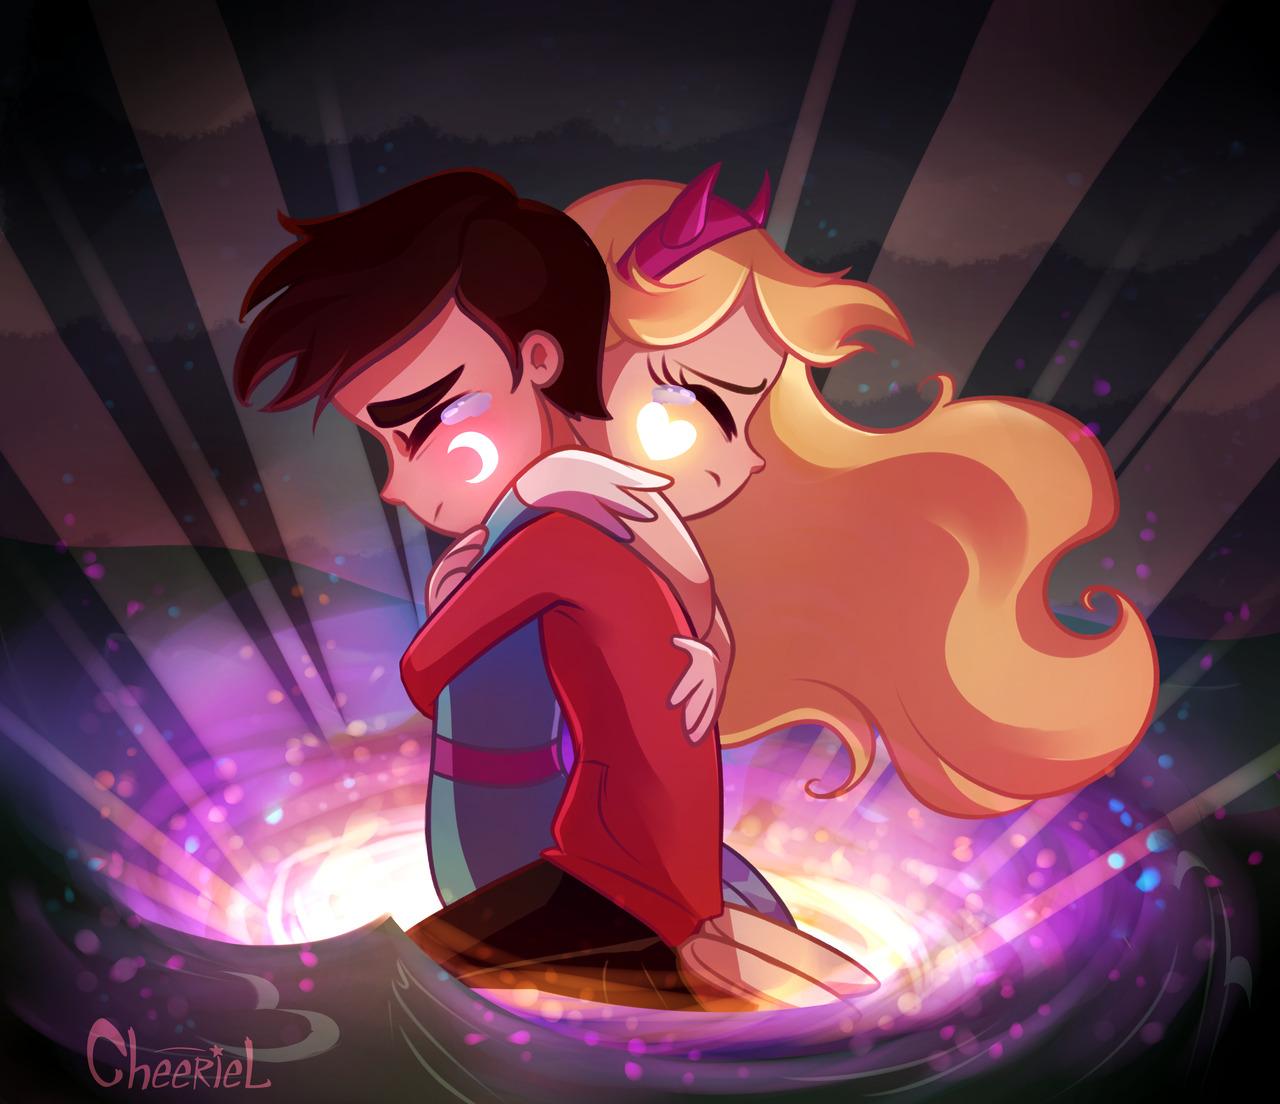 Star Butterfly vs. the Forces of Evil